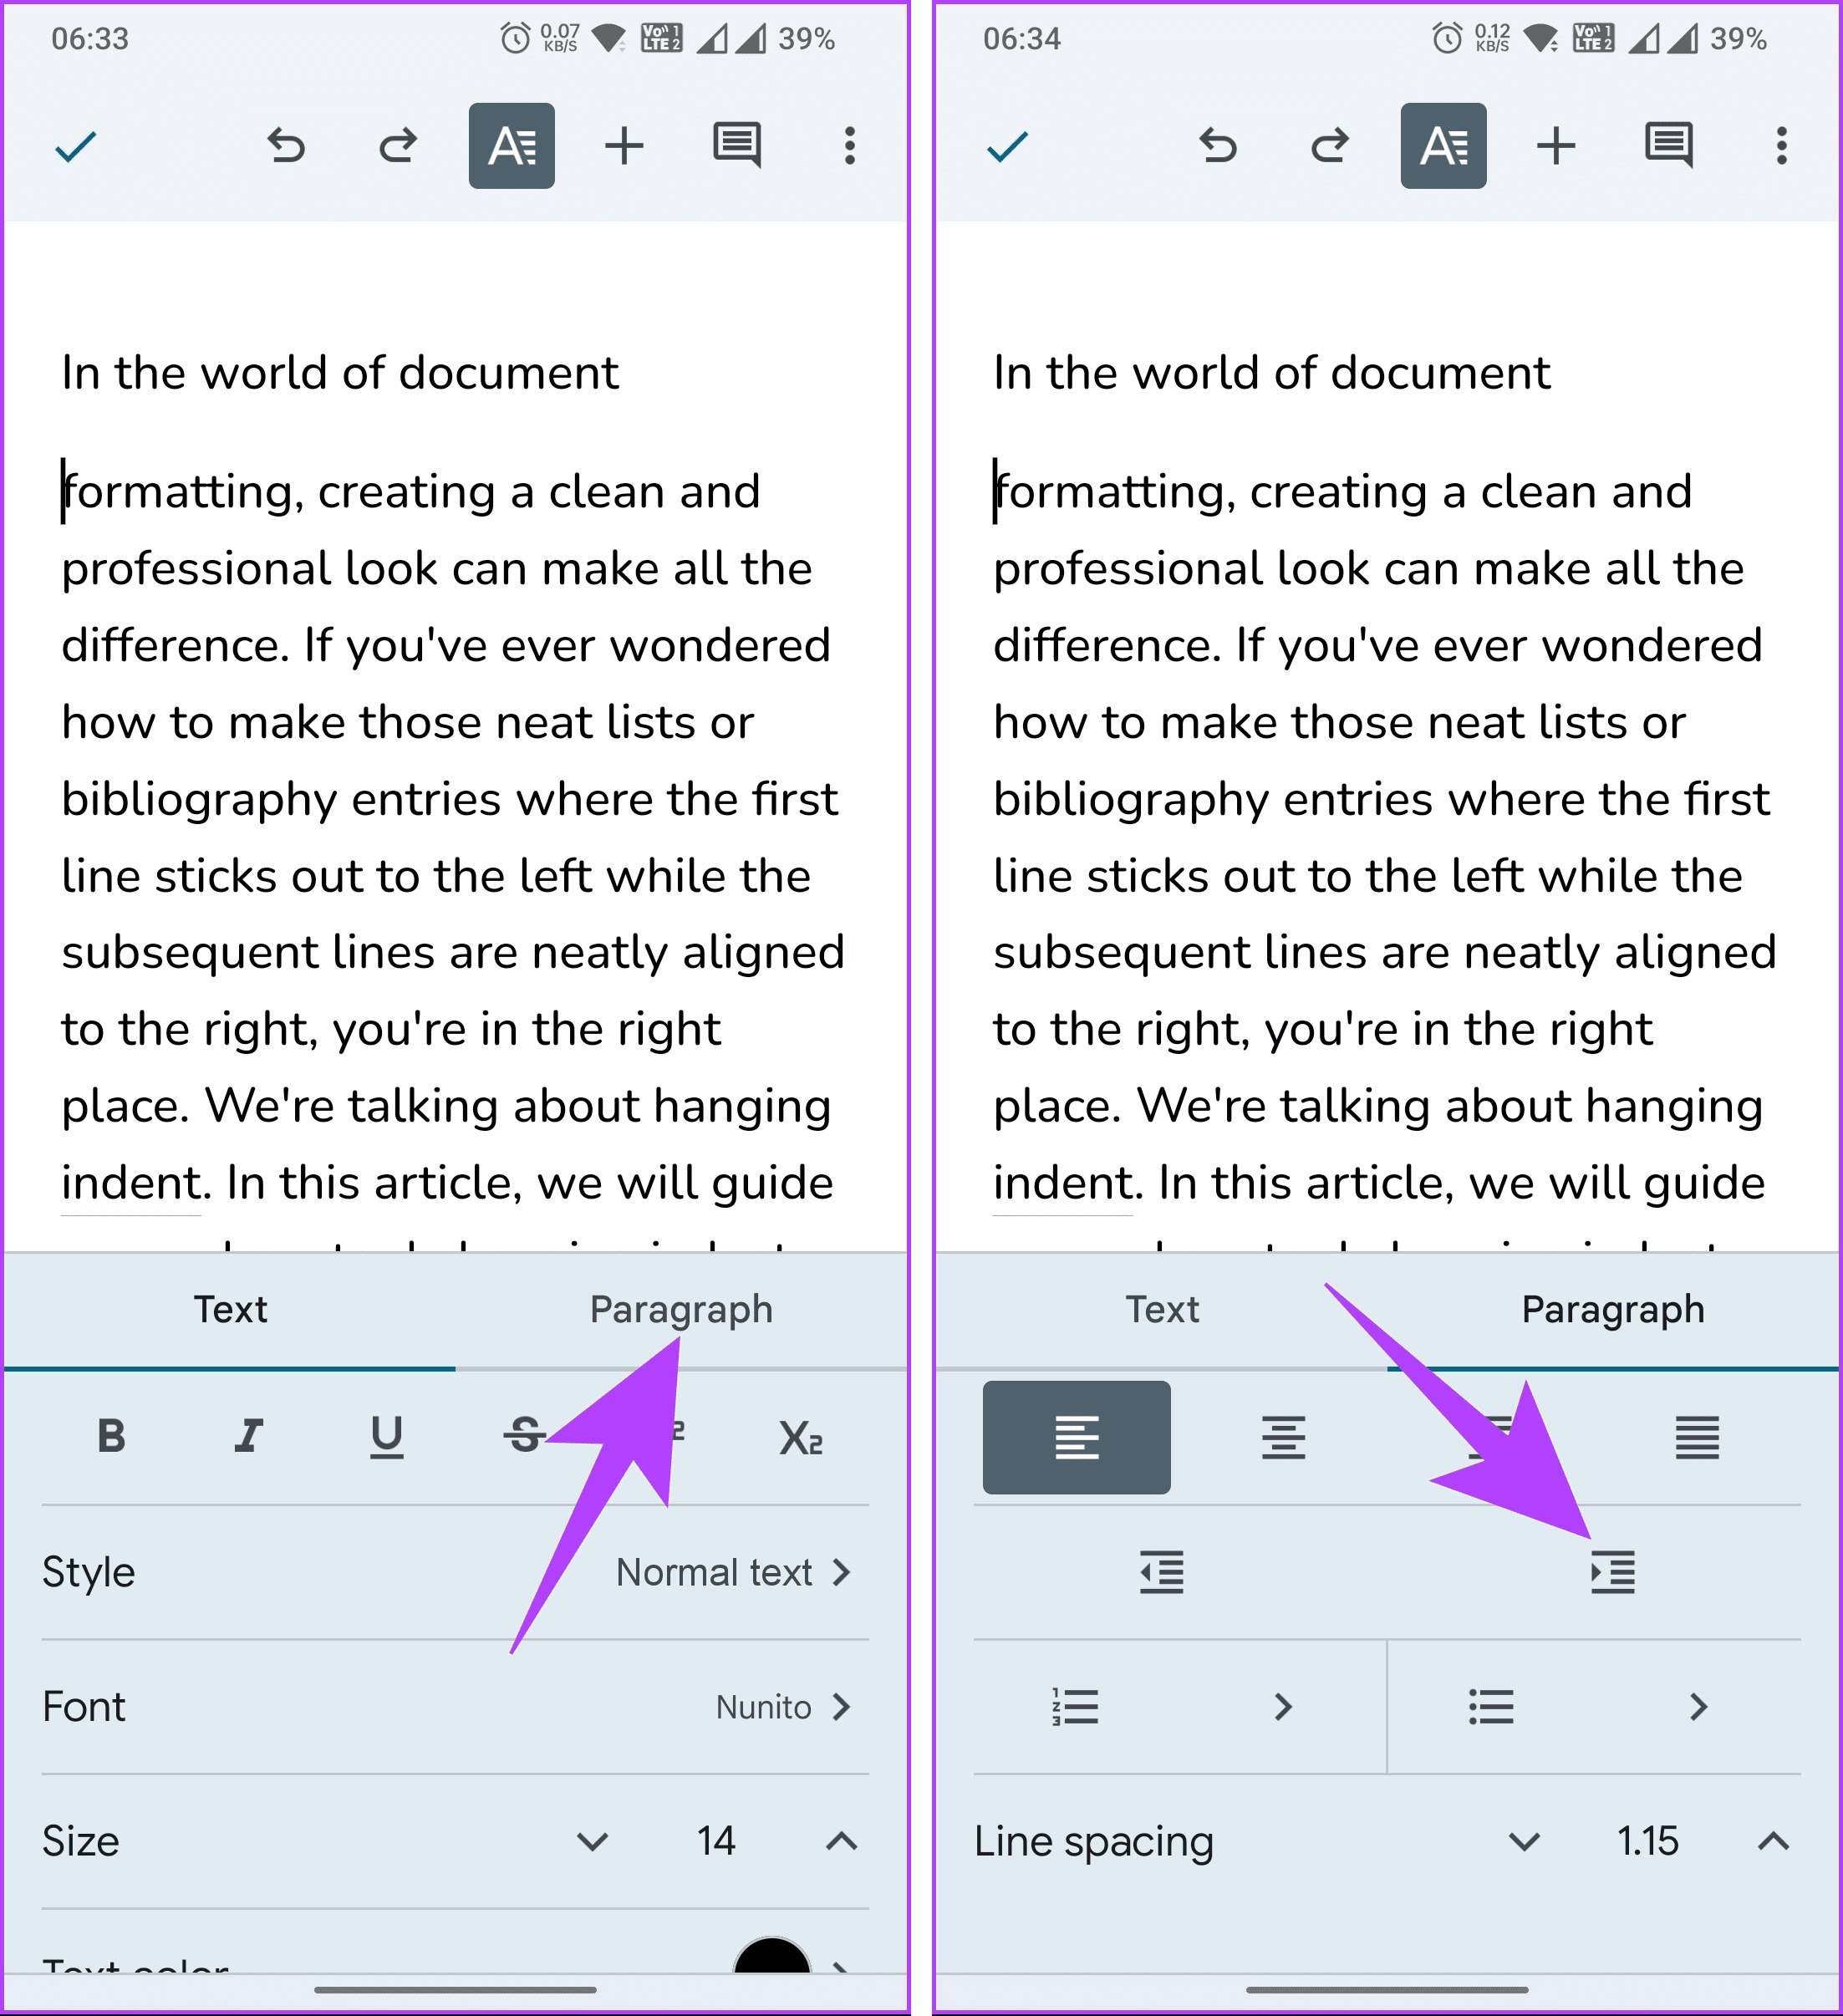 switch to the Paragraph tab